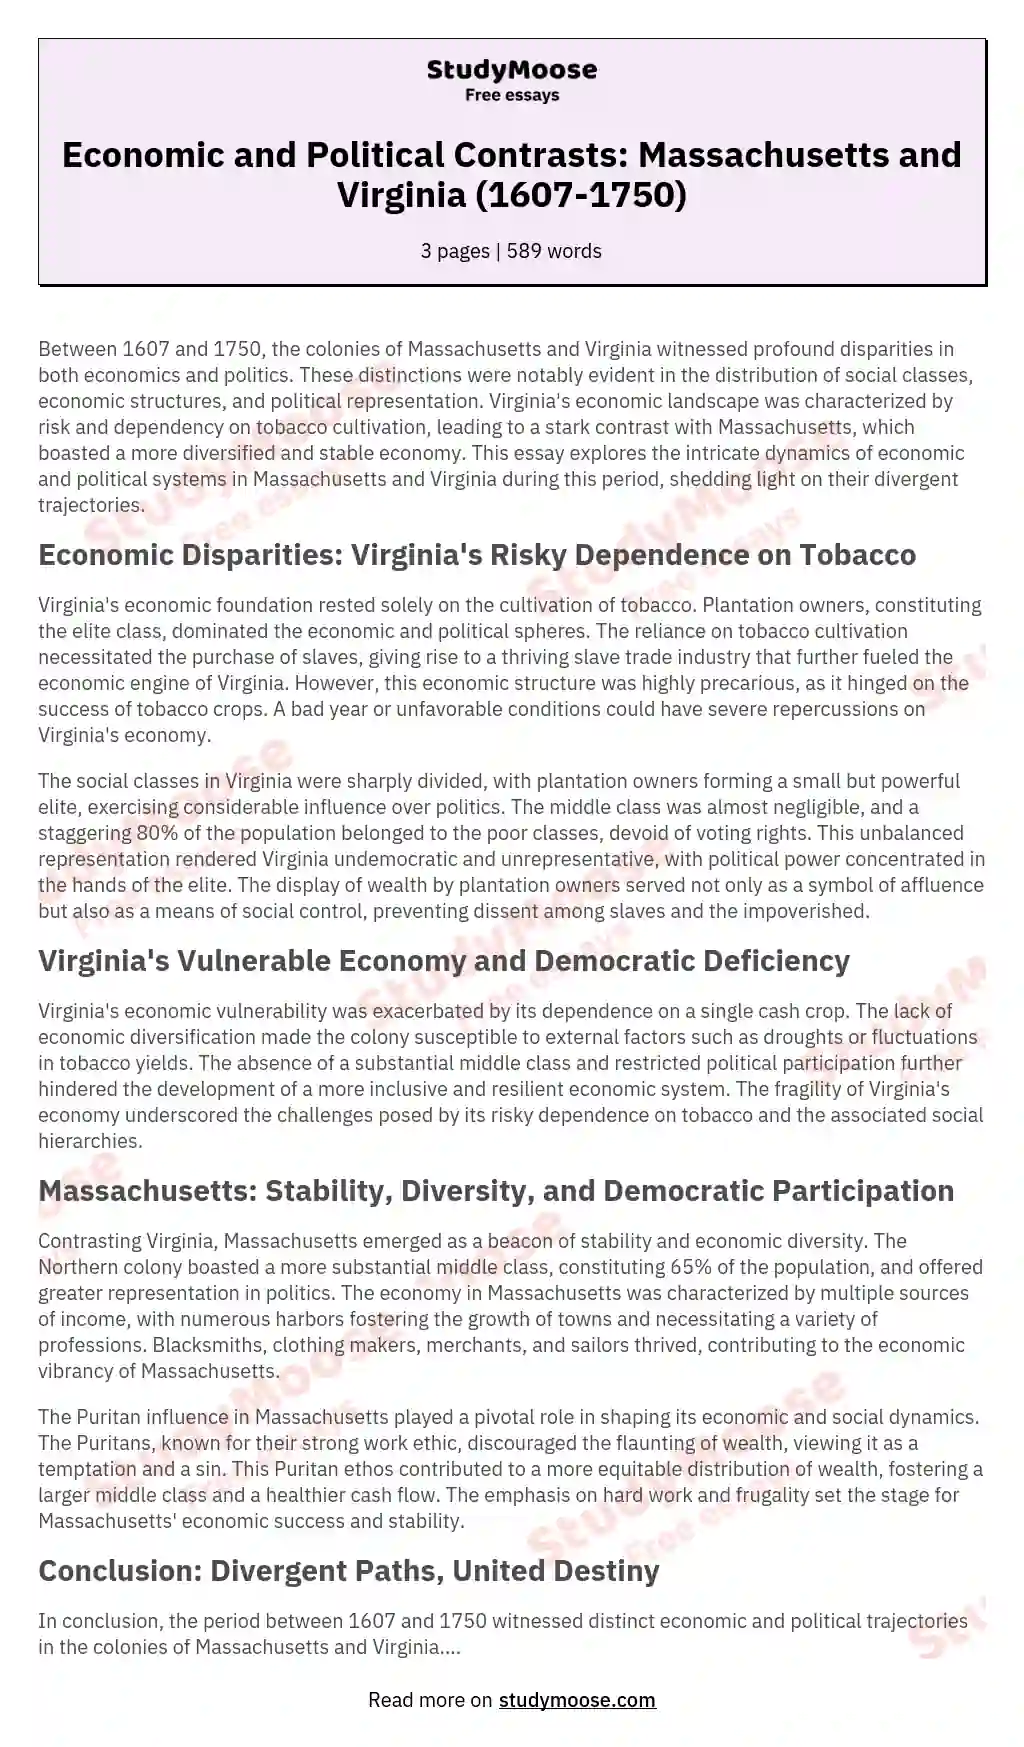 Economic and Political Contrasts: Massachusetts and Virginia (1607-1750) essay